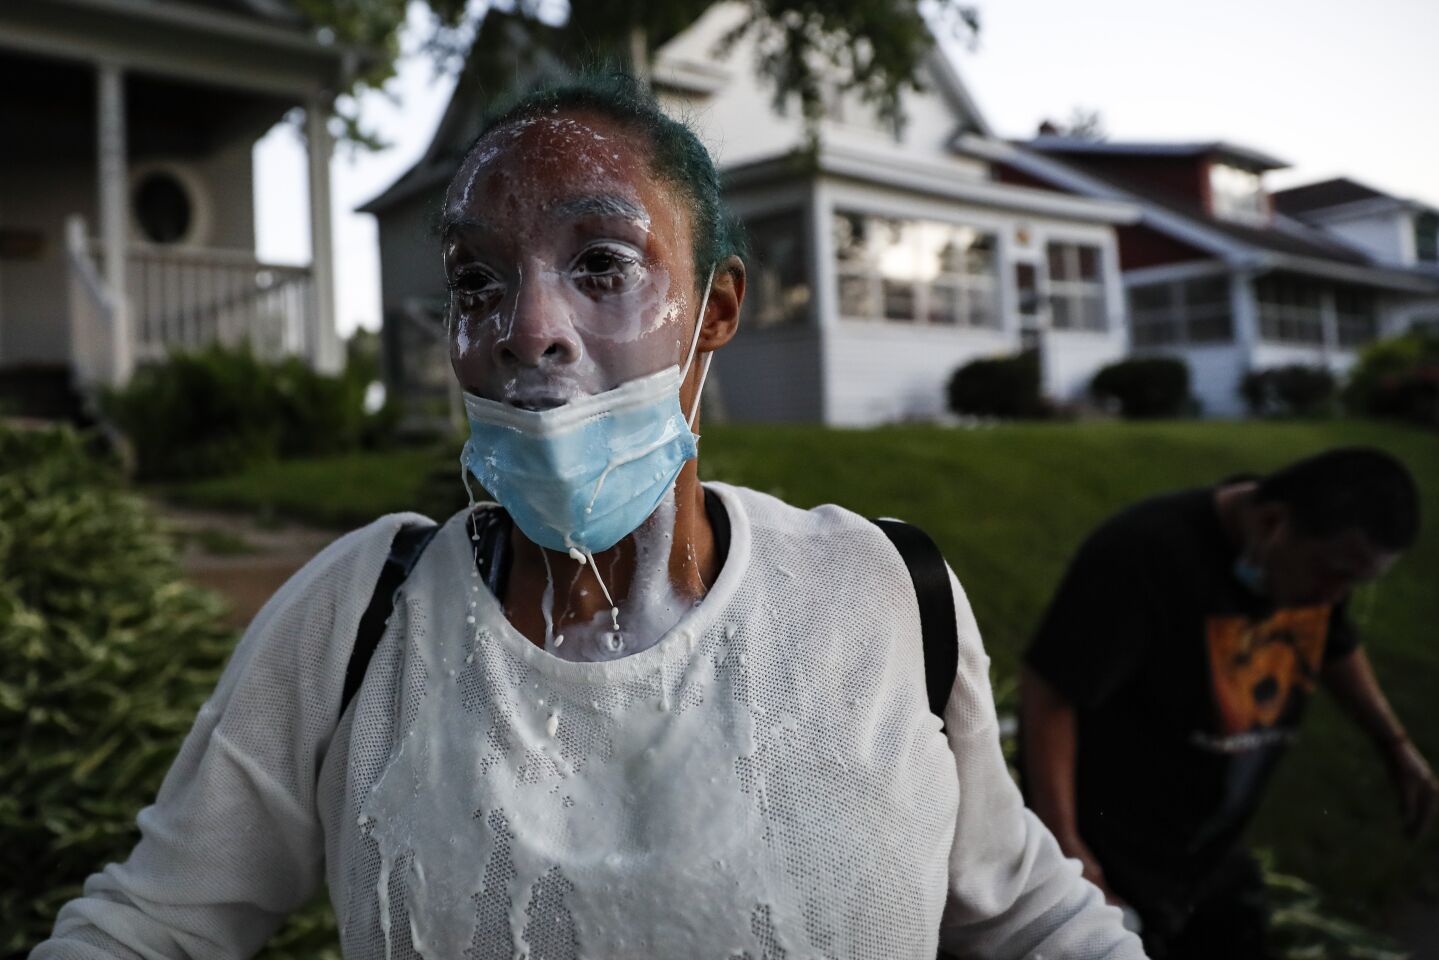 A protester douses her face with milk after being exposed to tear gas fired by police in St. Paul.